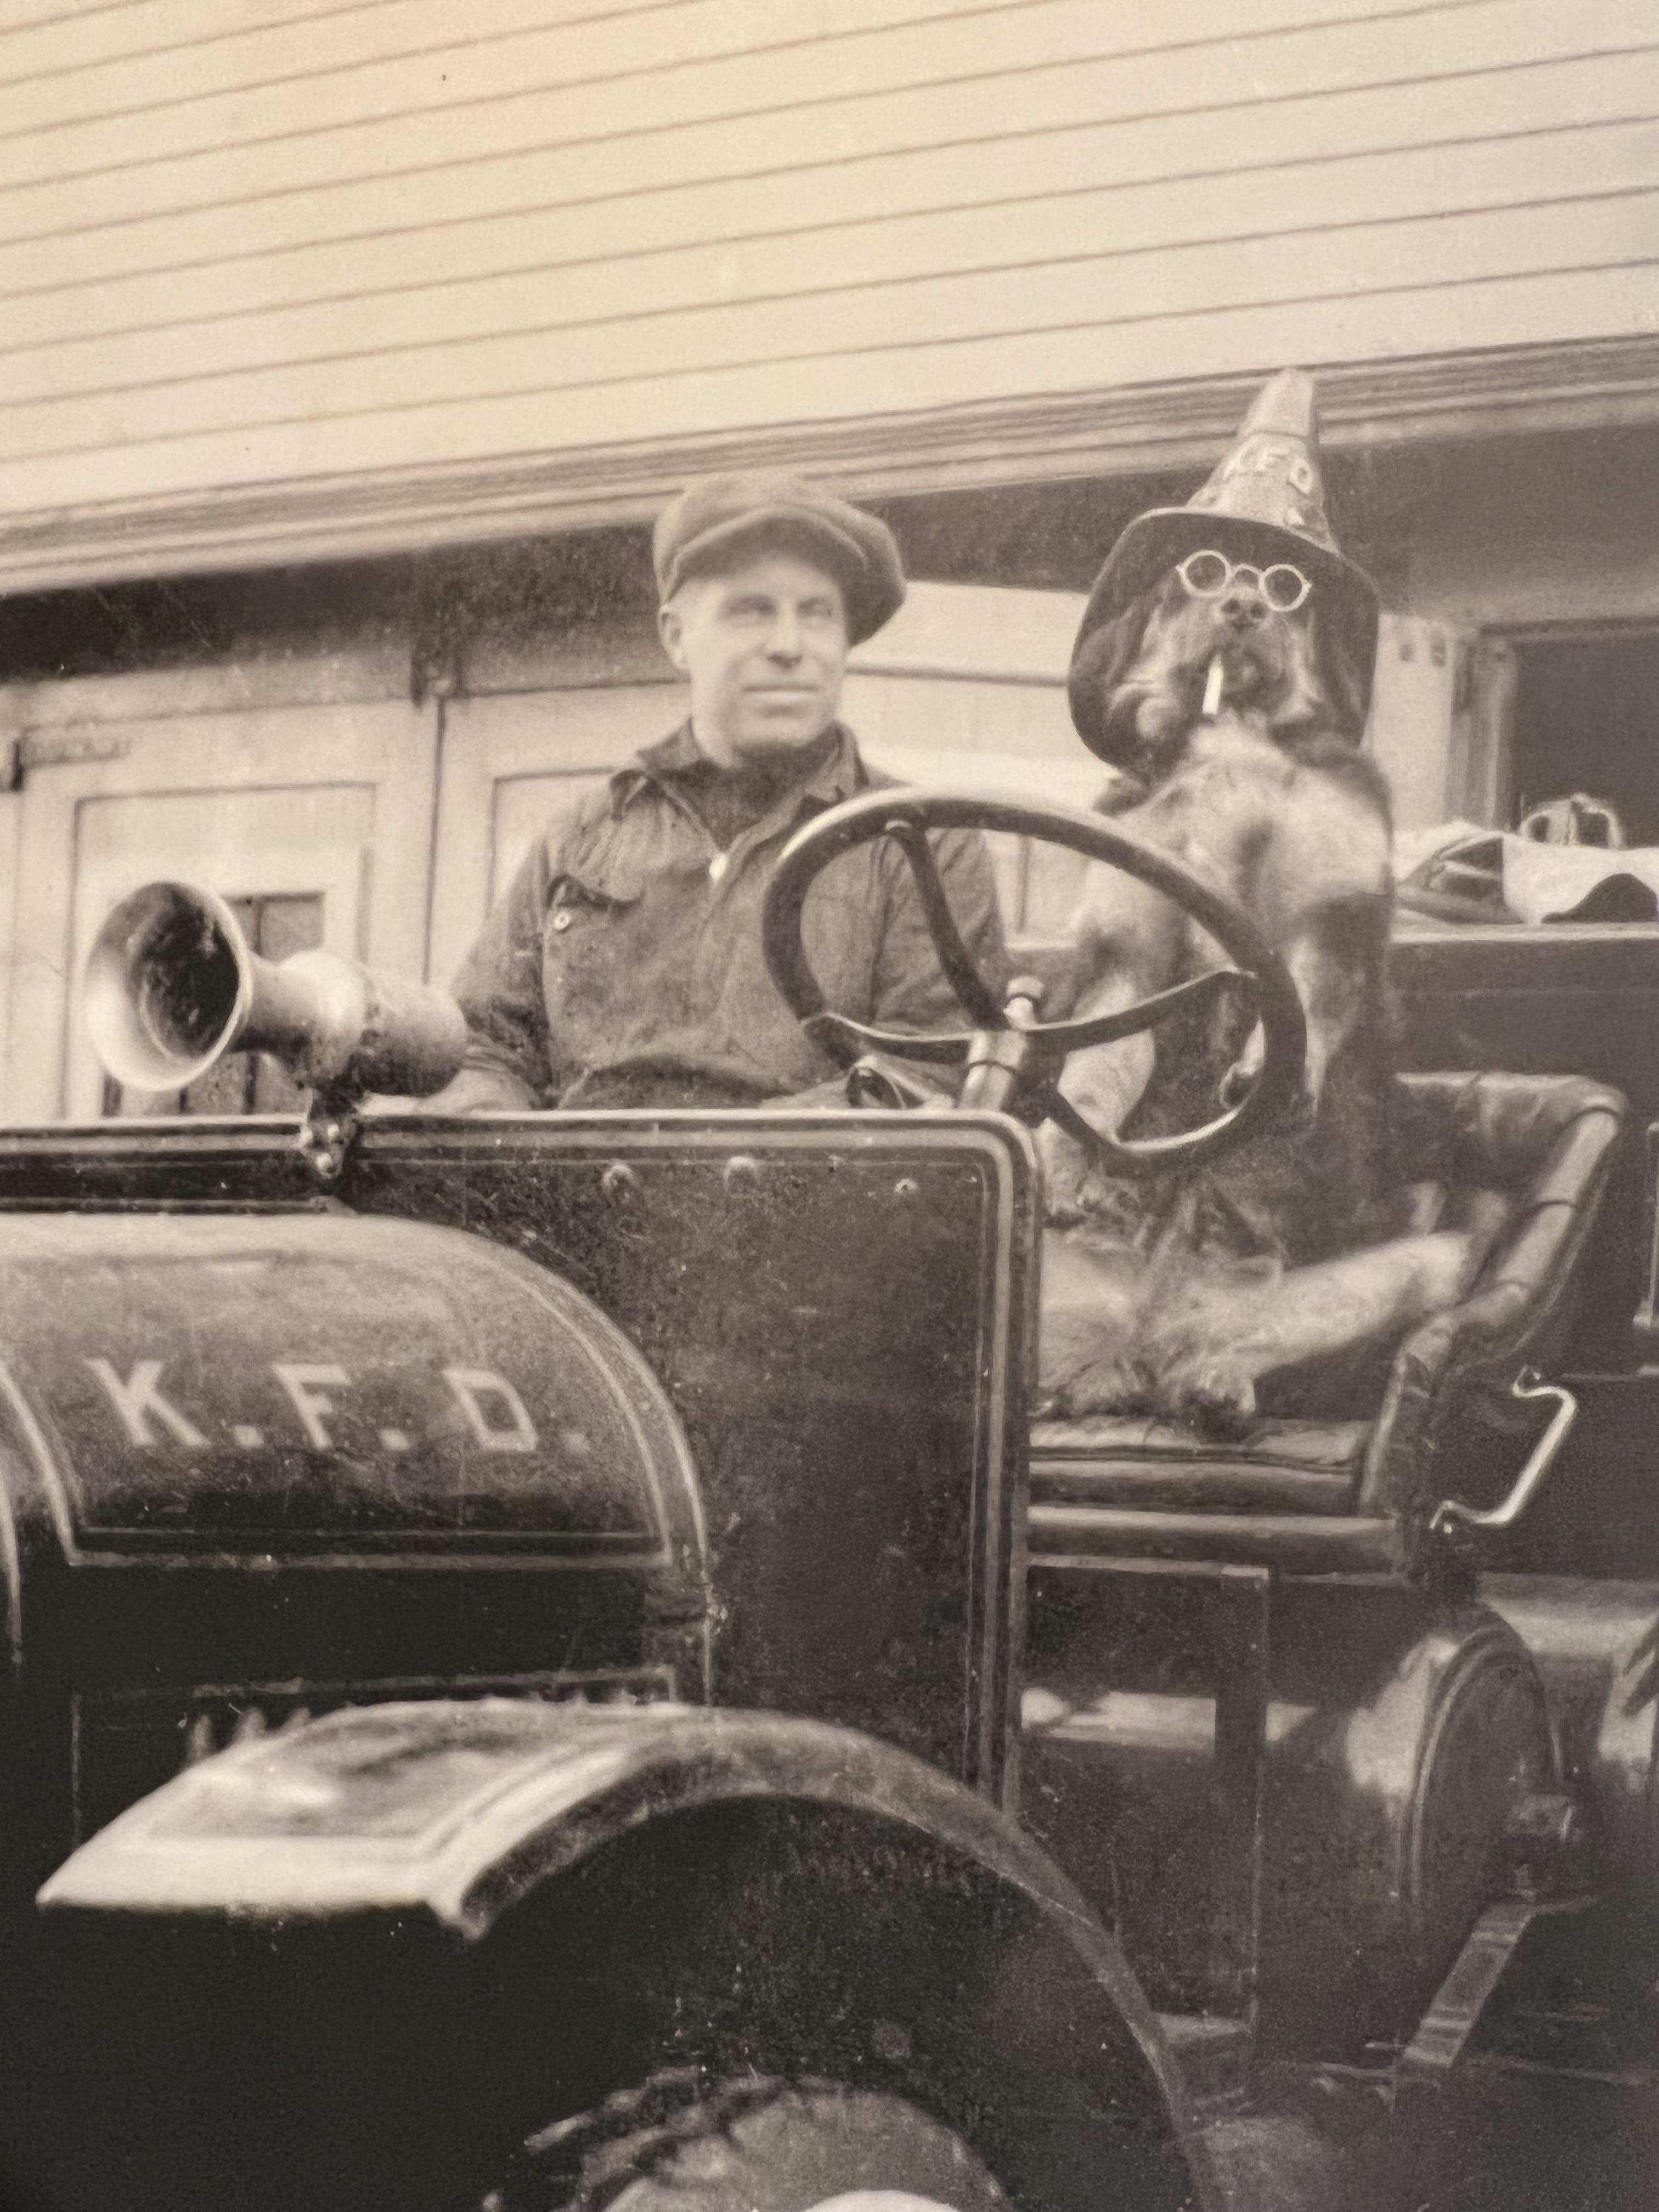 This dog and human serving with the Ketchikan, Alaska fire department circa 1904.jpg